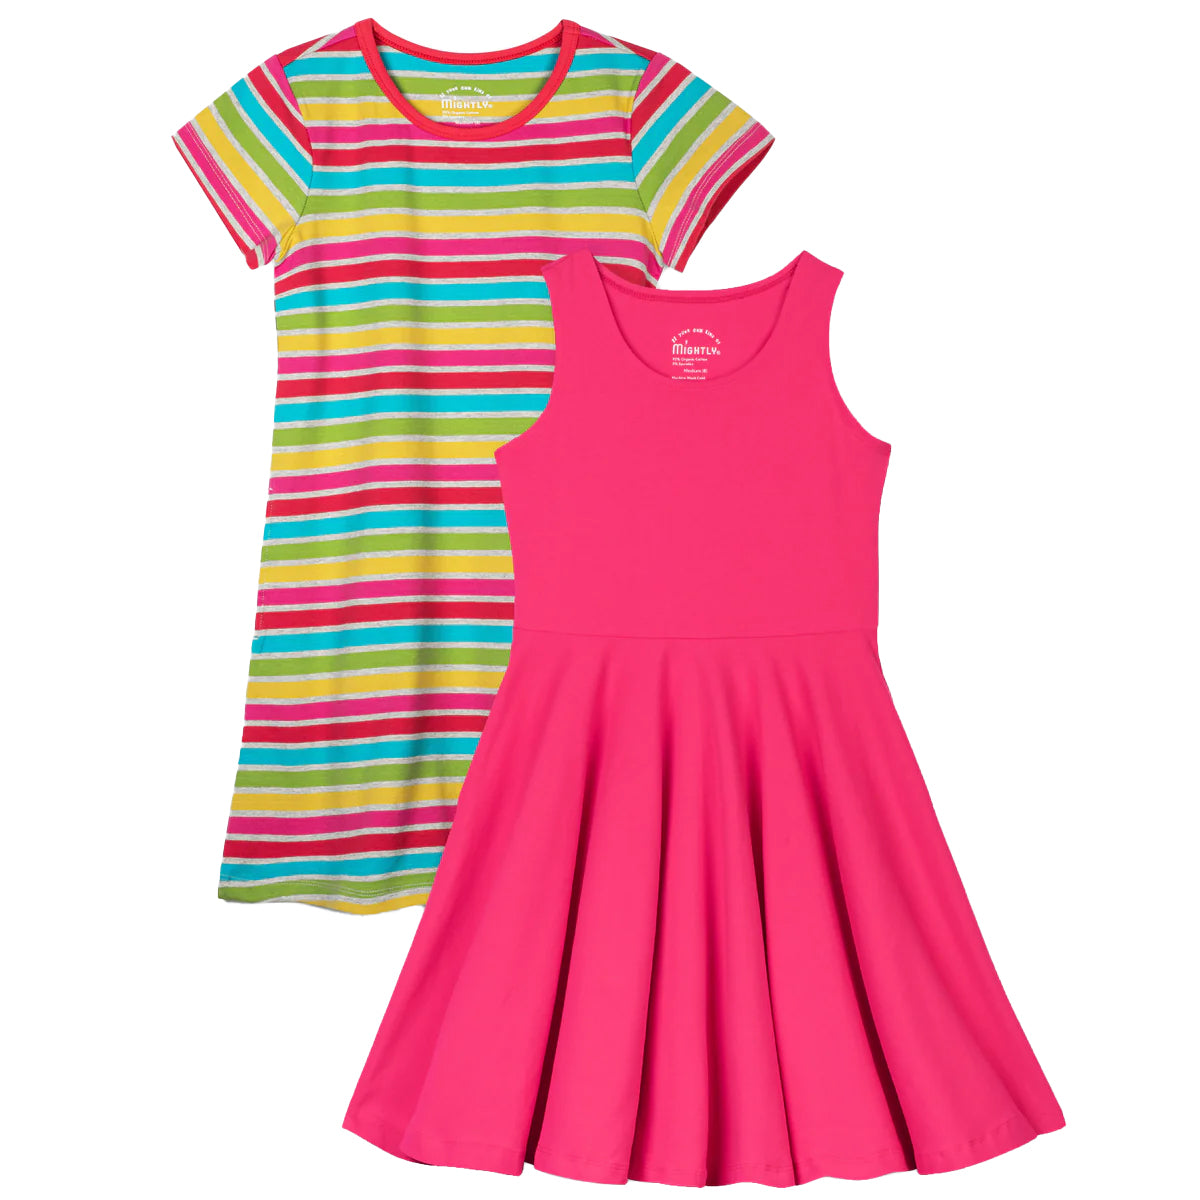 Pre-owned Rainbow Stripe Dress size: 6-14 Years